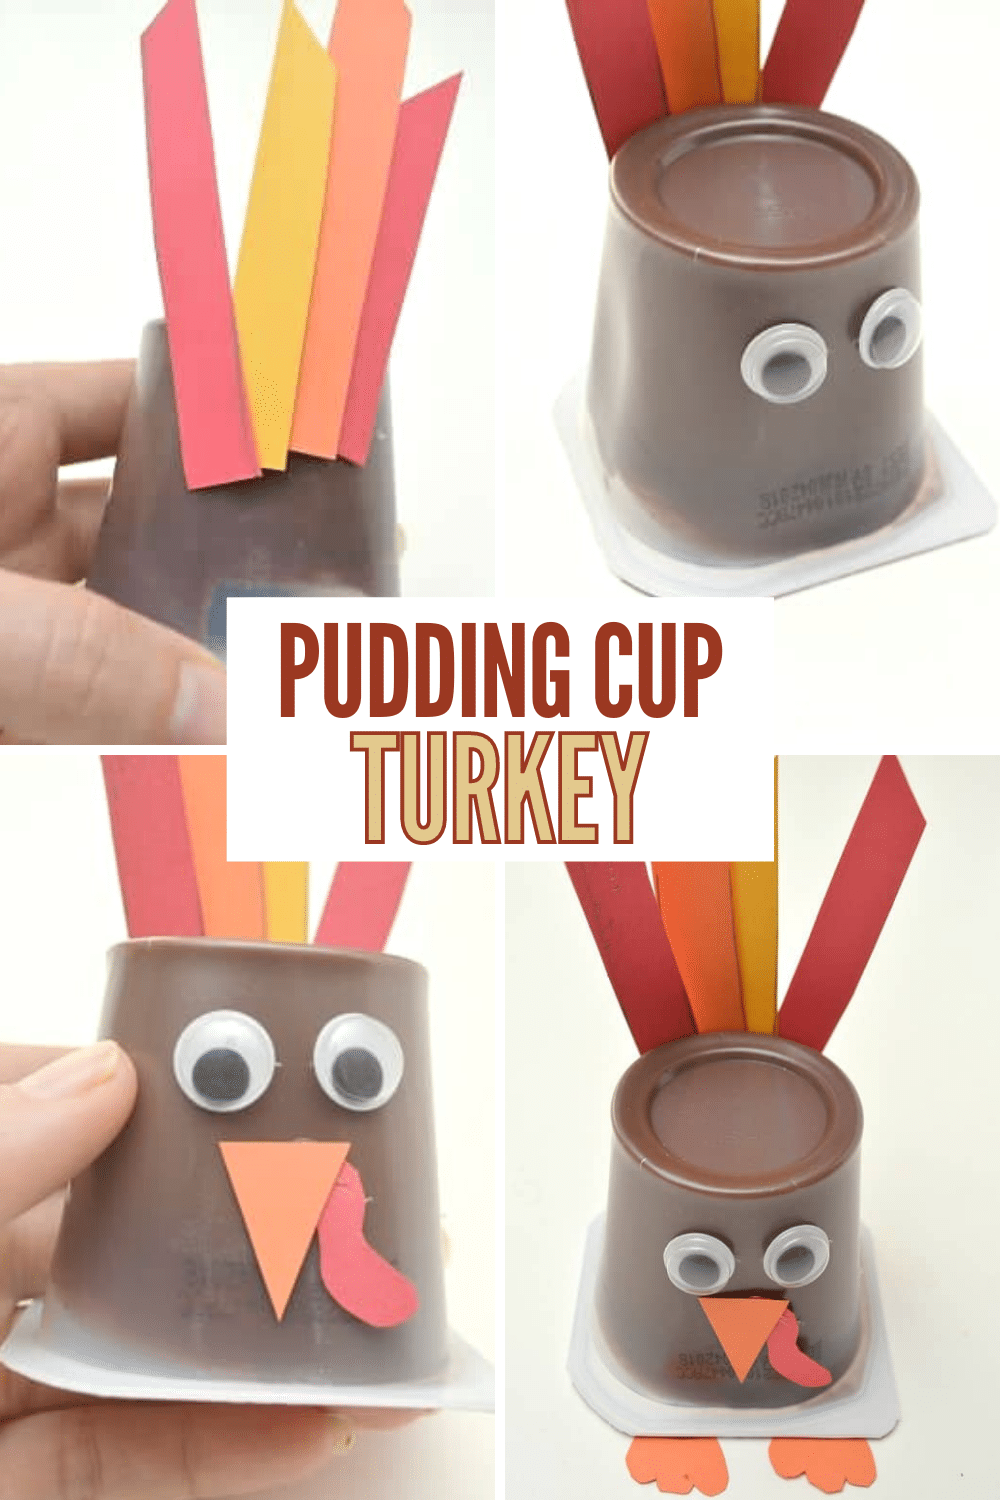 This pudding cup turkey craft is a super cute and easy way to treat your kids at Thanksgiving either in their lunches or for dessert. #turkeycraft #puddingcup #thanksgiving #forkids via @wondermomwannab